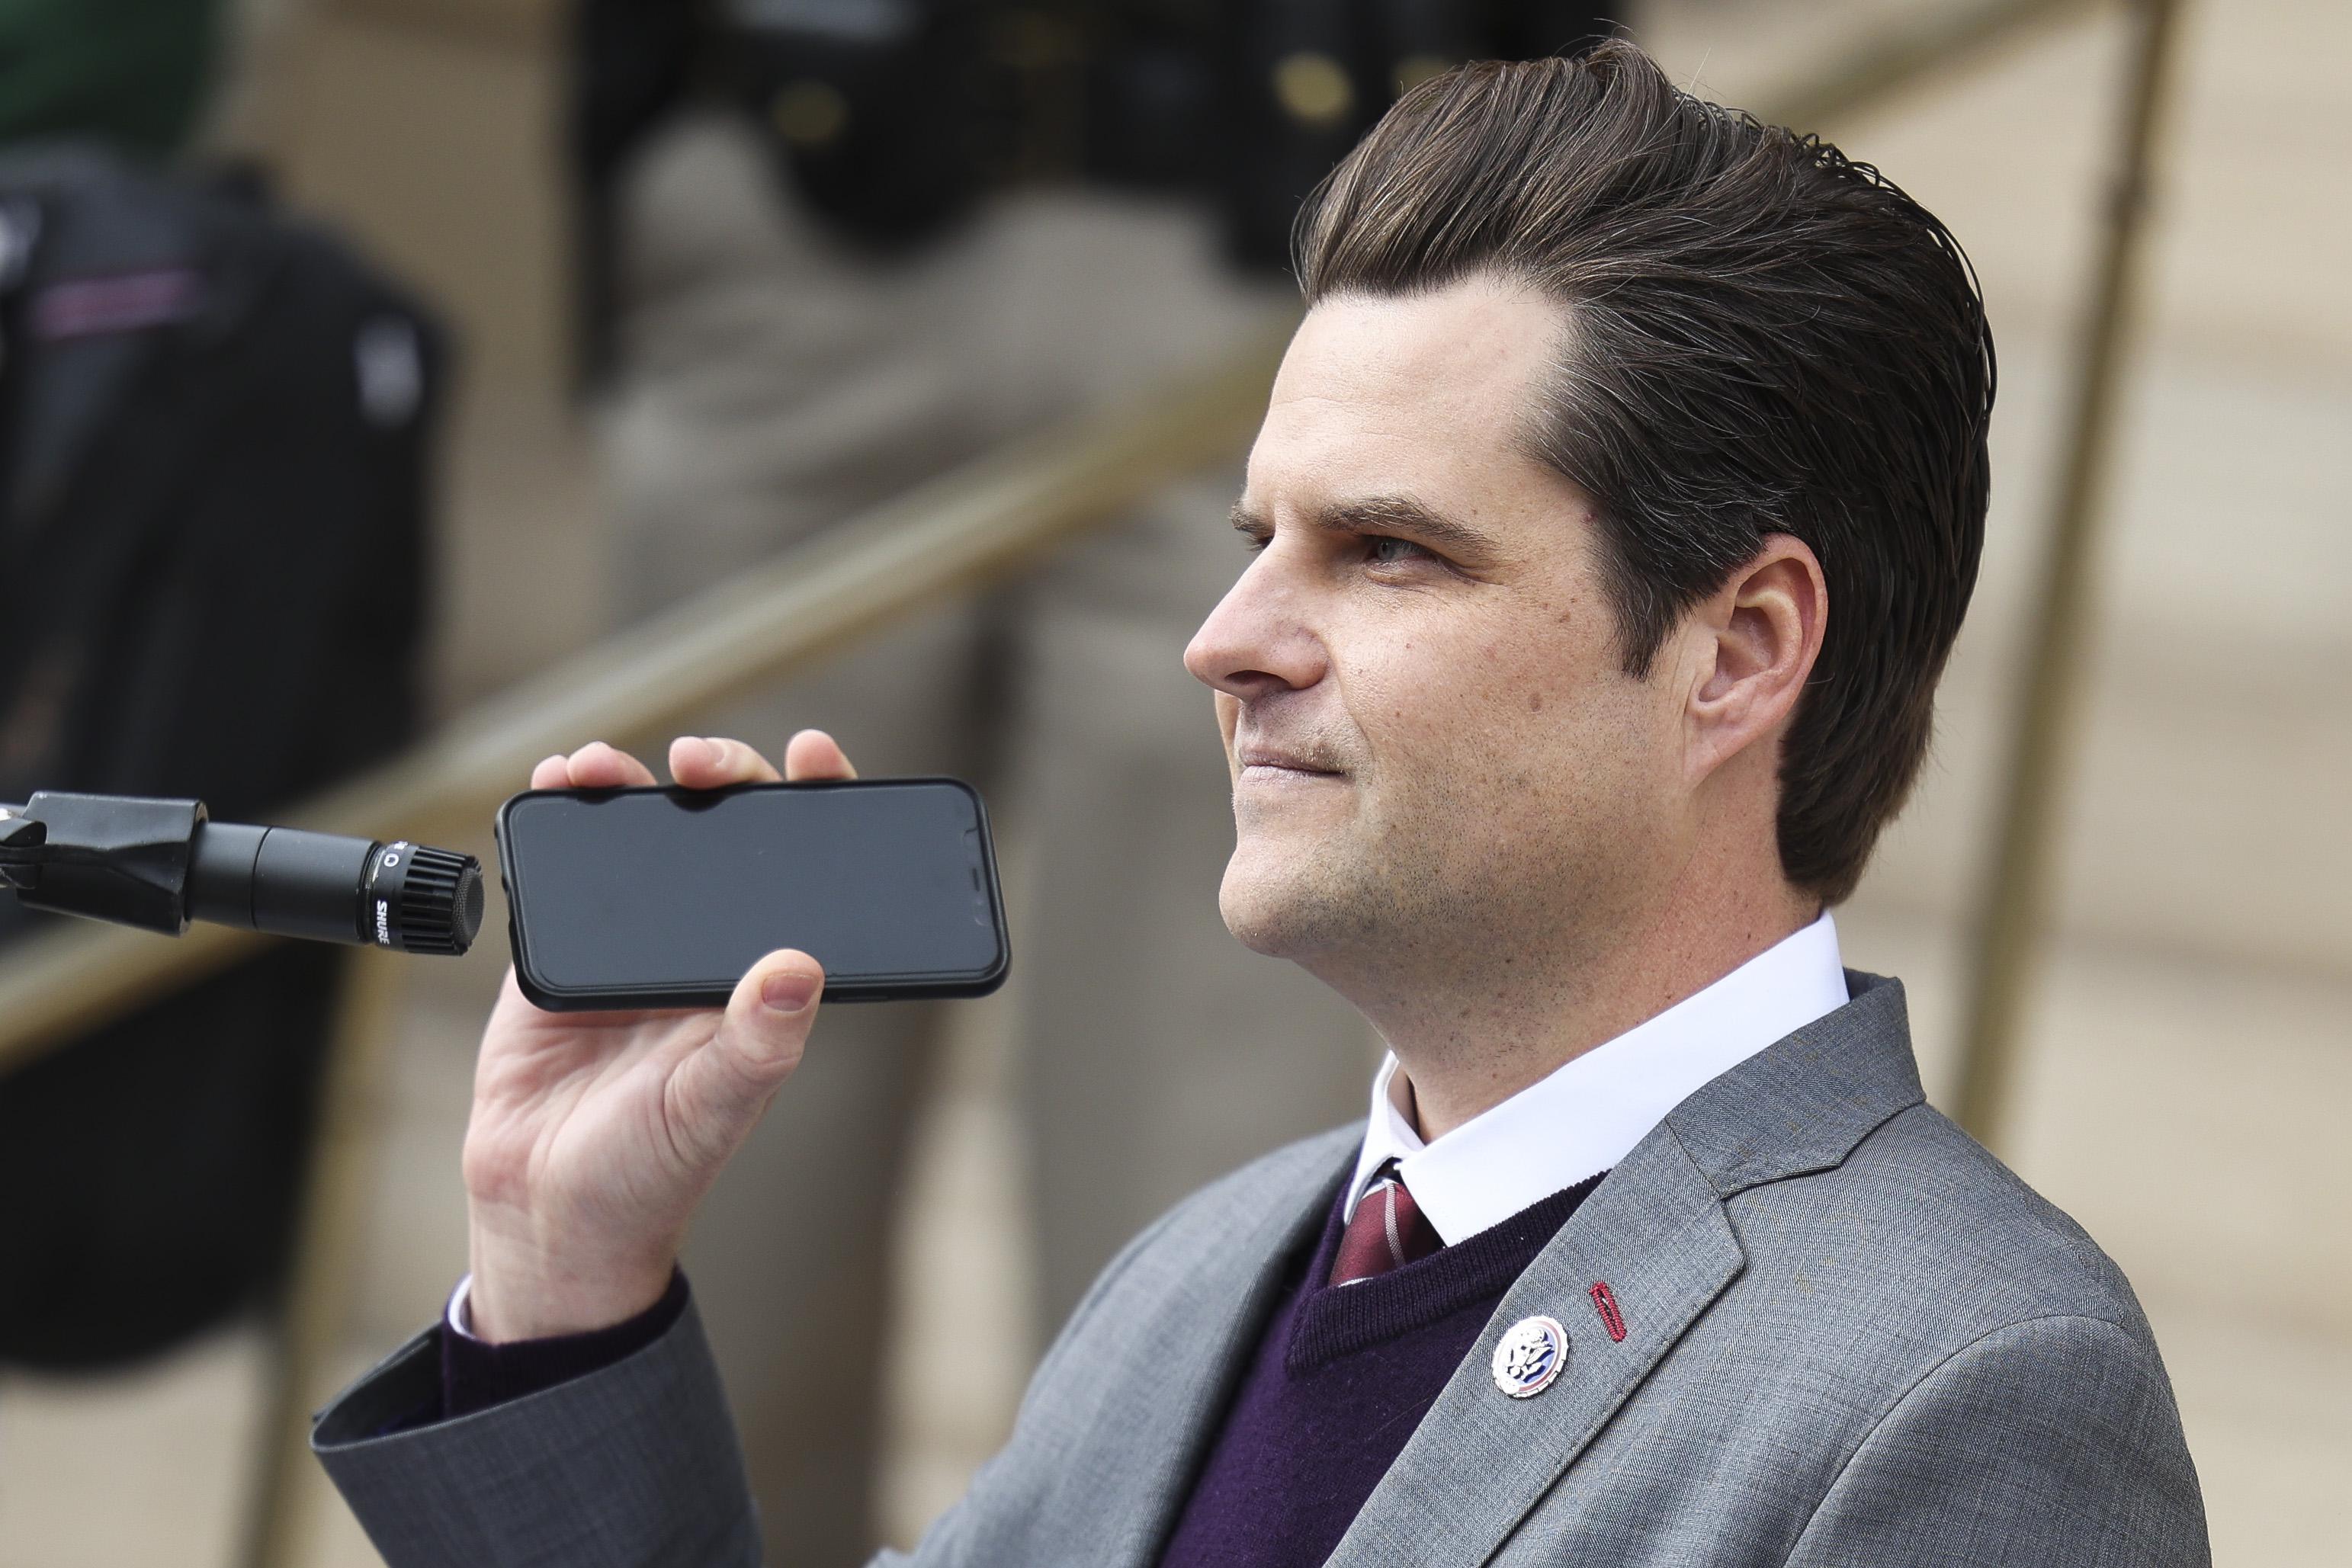 Rep. Matt Gaetz holds a phone to the microphone as Donald Trump Jr. speaks remotely to a crowd during a rally against Rep. Liz Cheney (R-WY) on January 28, 2021 in Cheyenne, Wyoming.